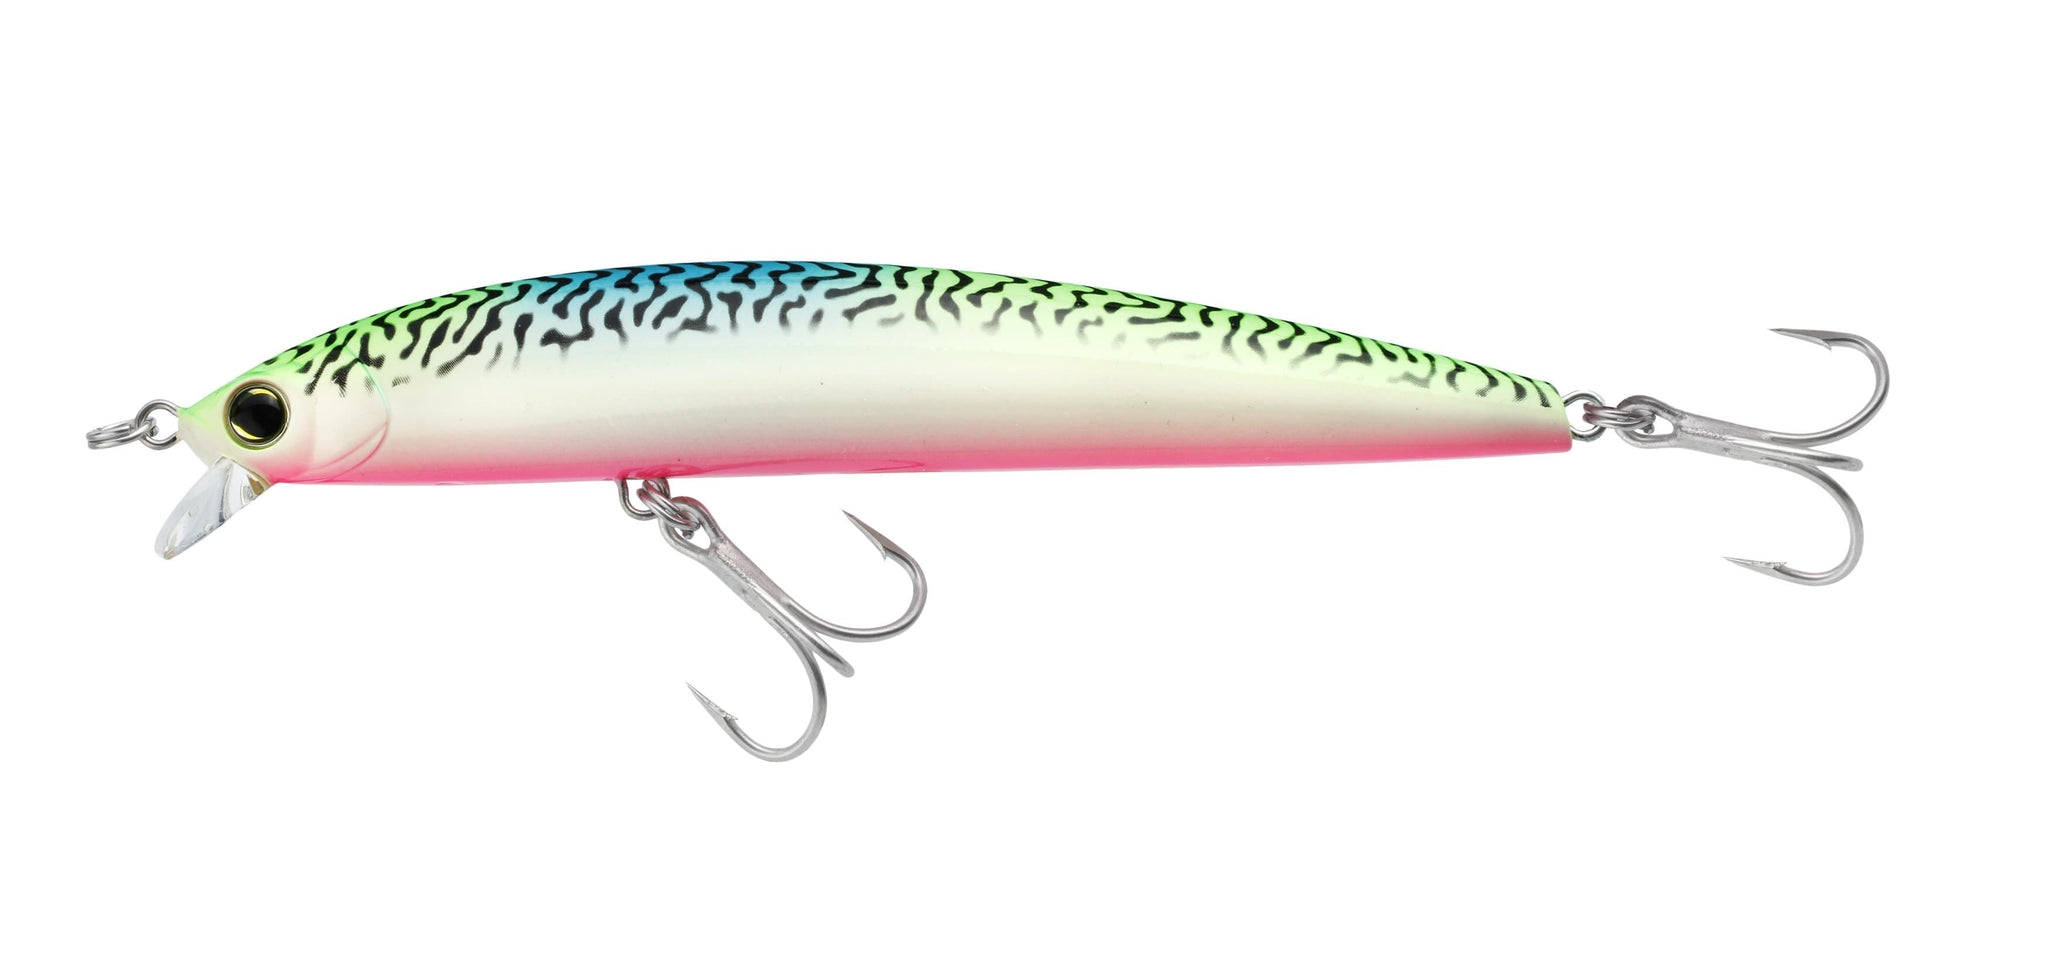 NEW FOR 2024! A great selection of 3 top performing 1/4 Oz lures